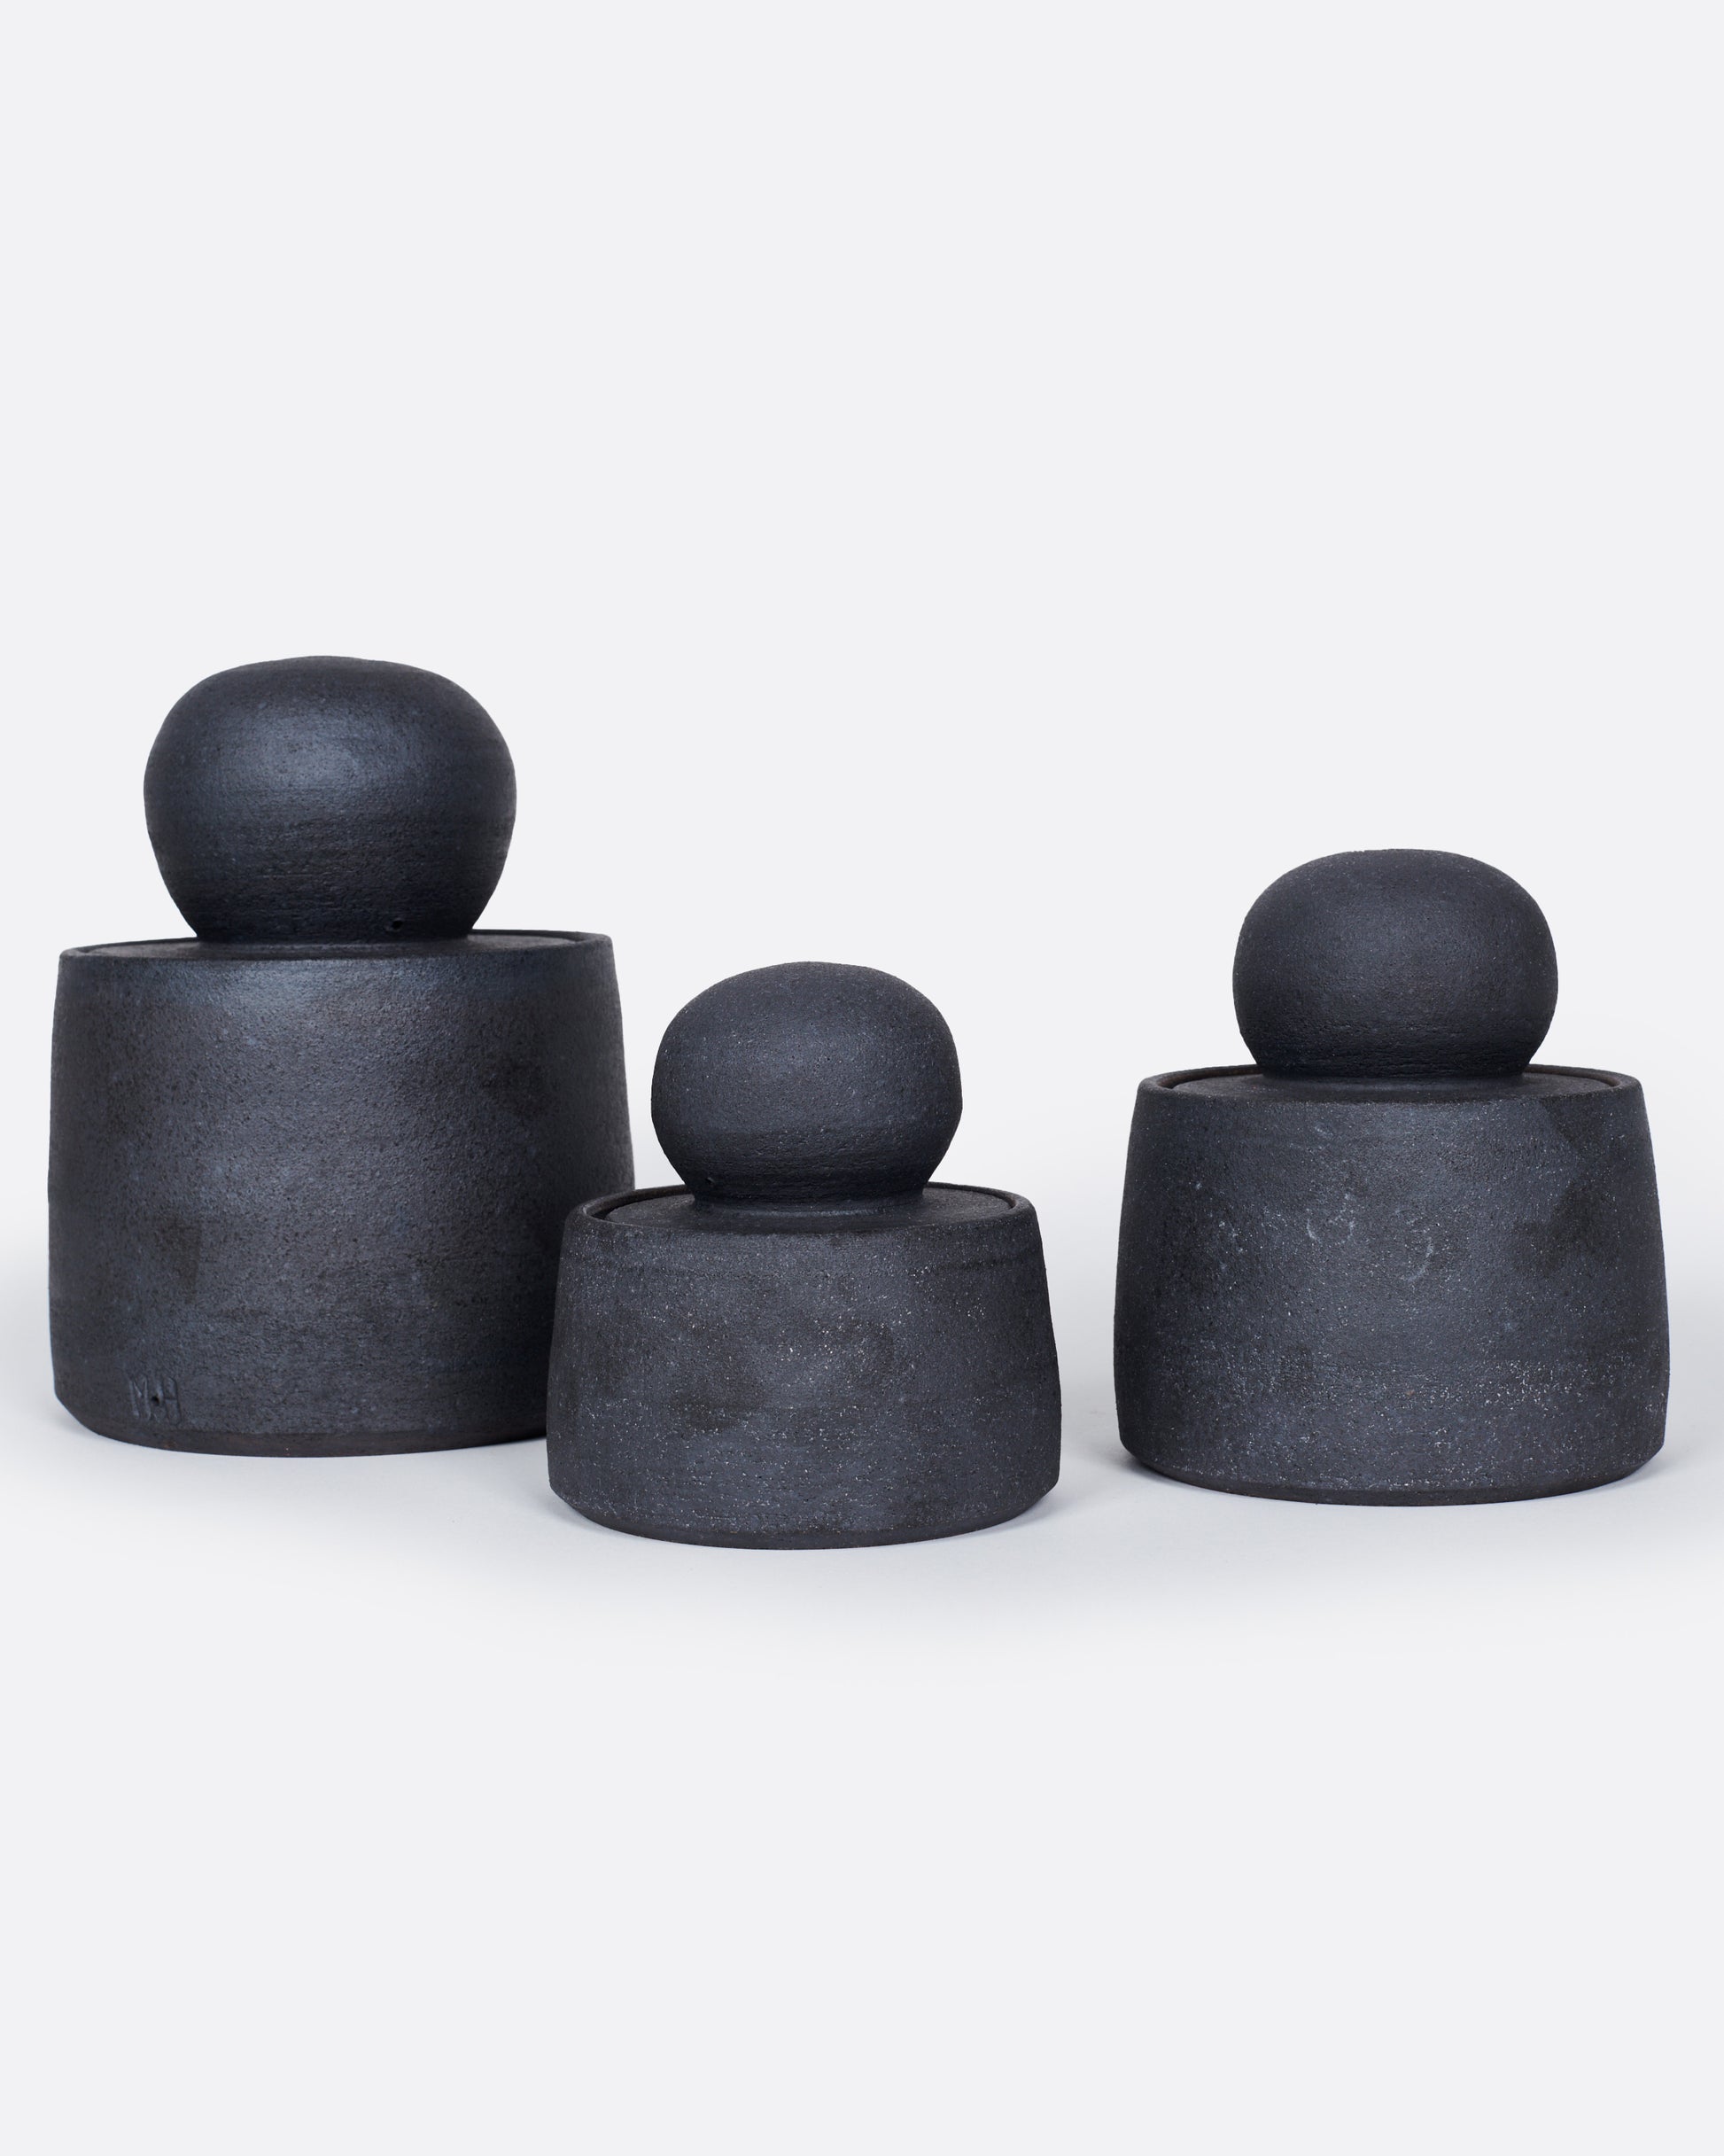 A group of three black jars with globe lids, shown from the front.